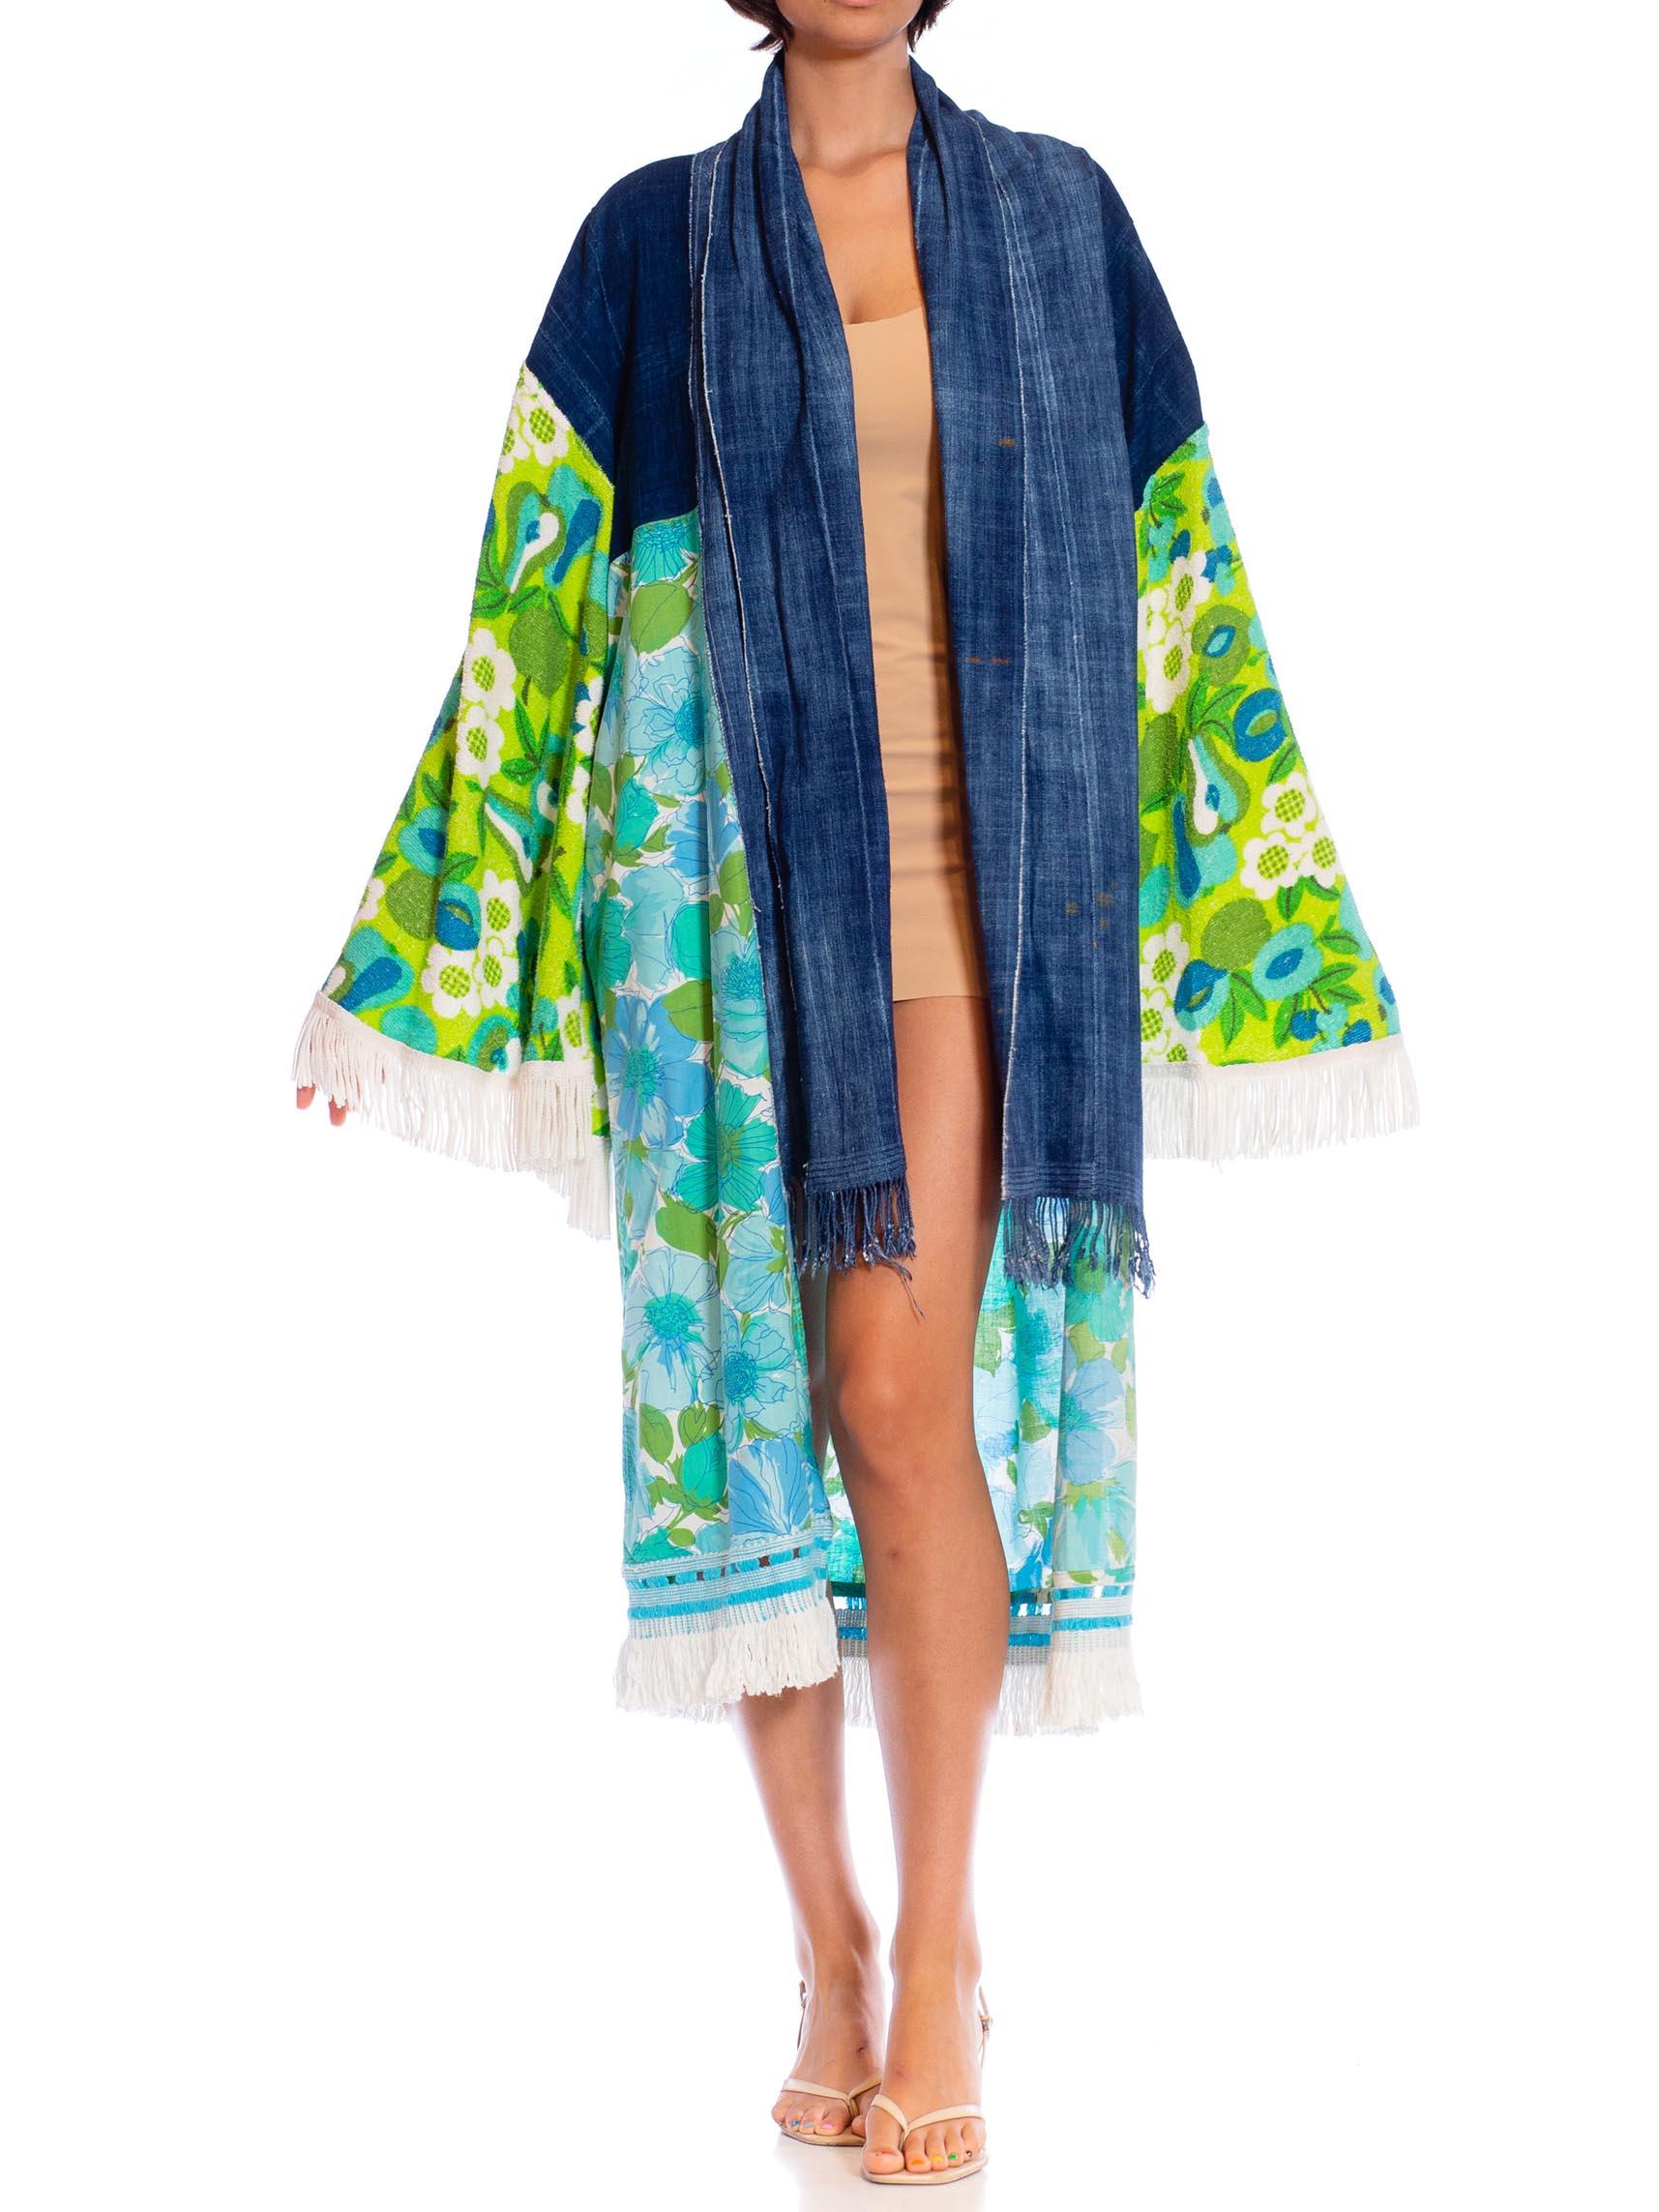 This piece is made with west African indigo pieced together with floral fabrics from the 1970s. Terry cloth butterfly sleeves finished off with fun vintage cotton fringe MORPHEW COLLECTION Blue & Green African Indigo Vintage 70S Floral Duster Beach